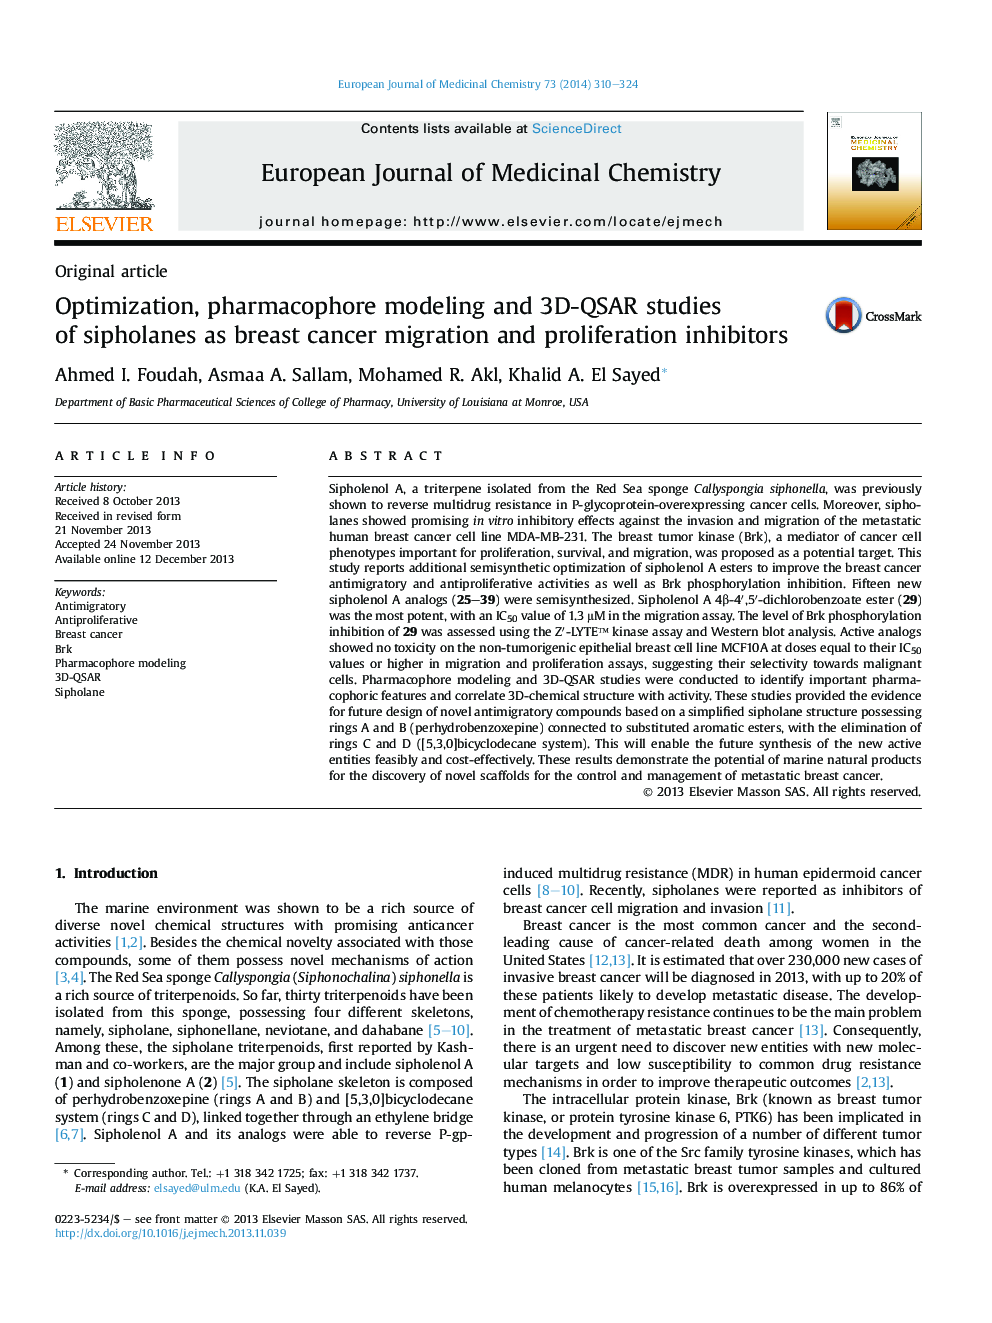 Optimization, pharmacophore modeling and 3D-QSAR studies of sipholanes as breast cancer migration and proliferation inhibitors